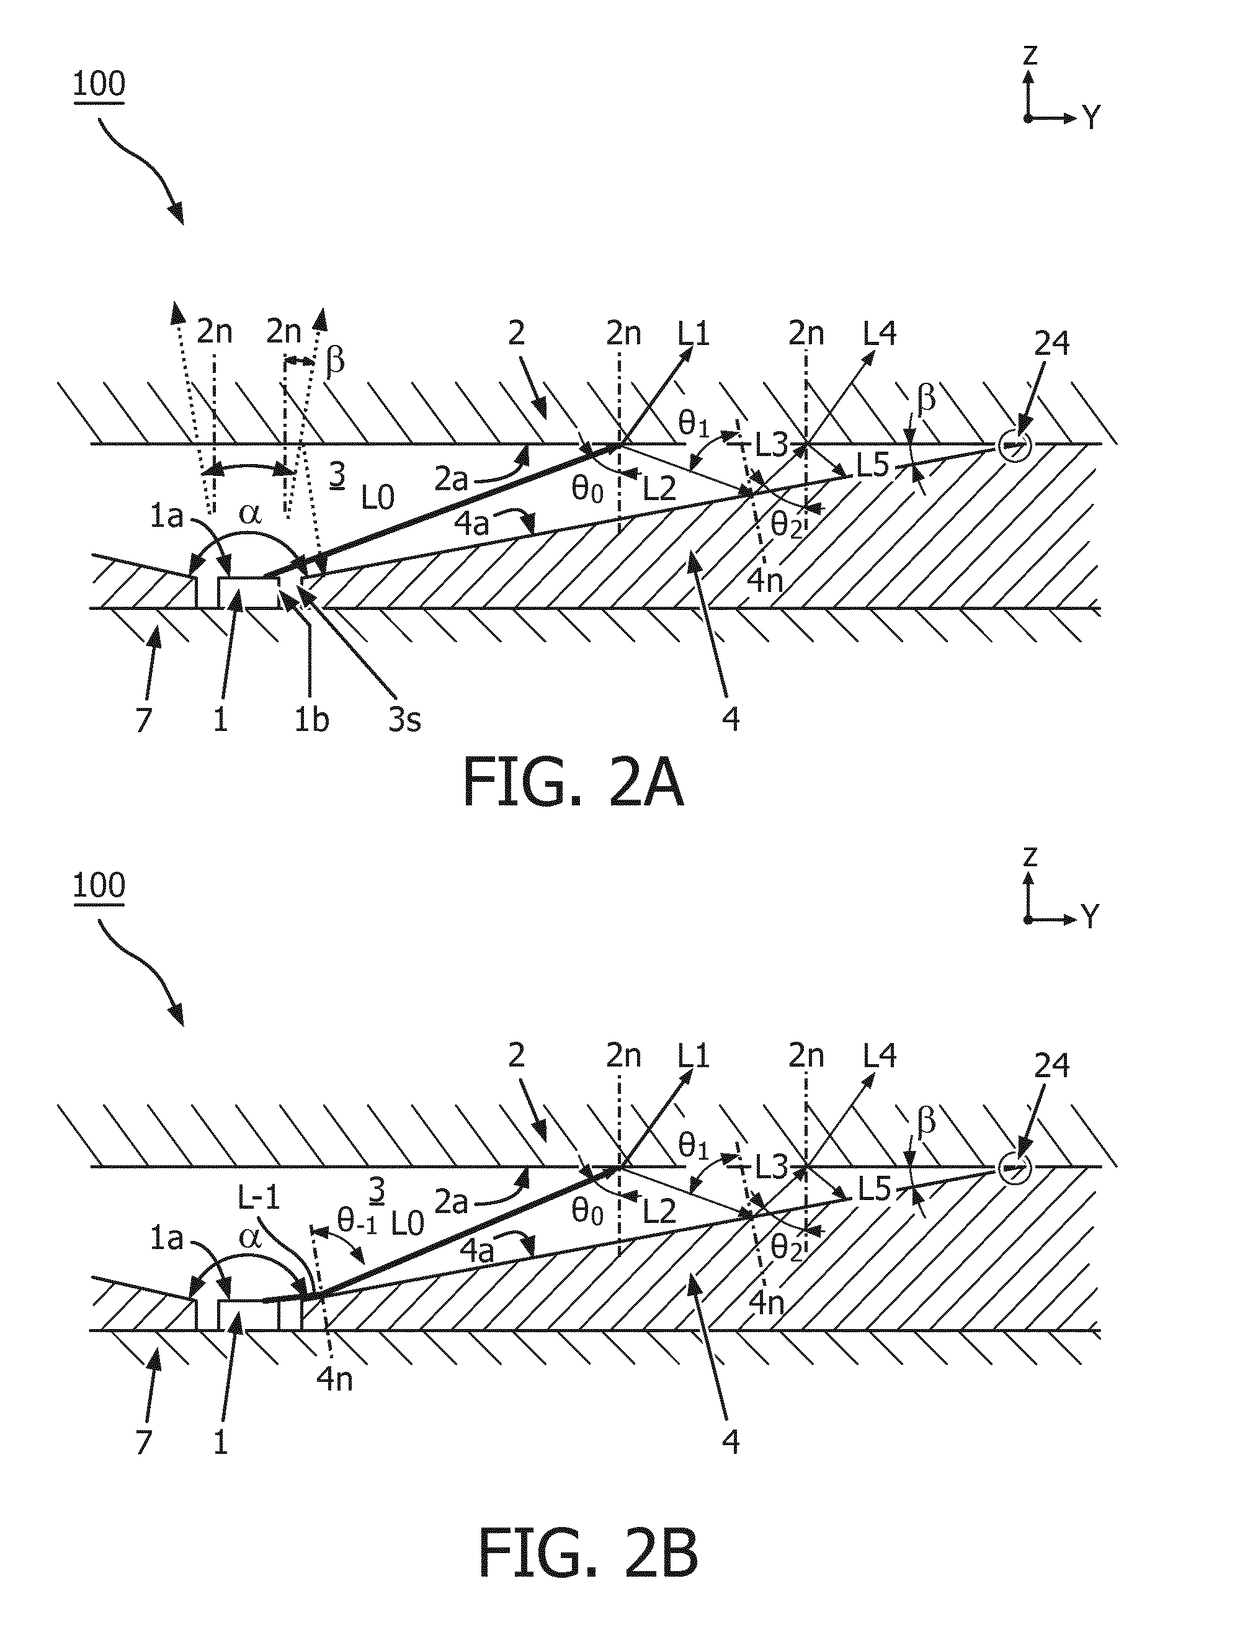 Lighting device for coupling light from a light source into a light guide plate